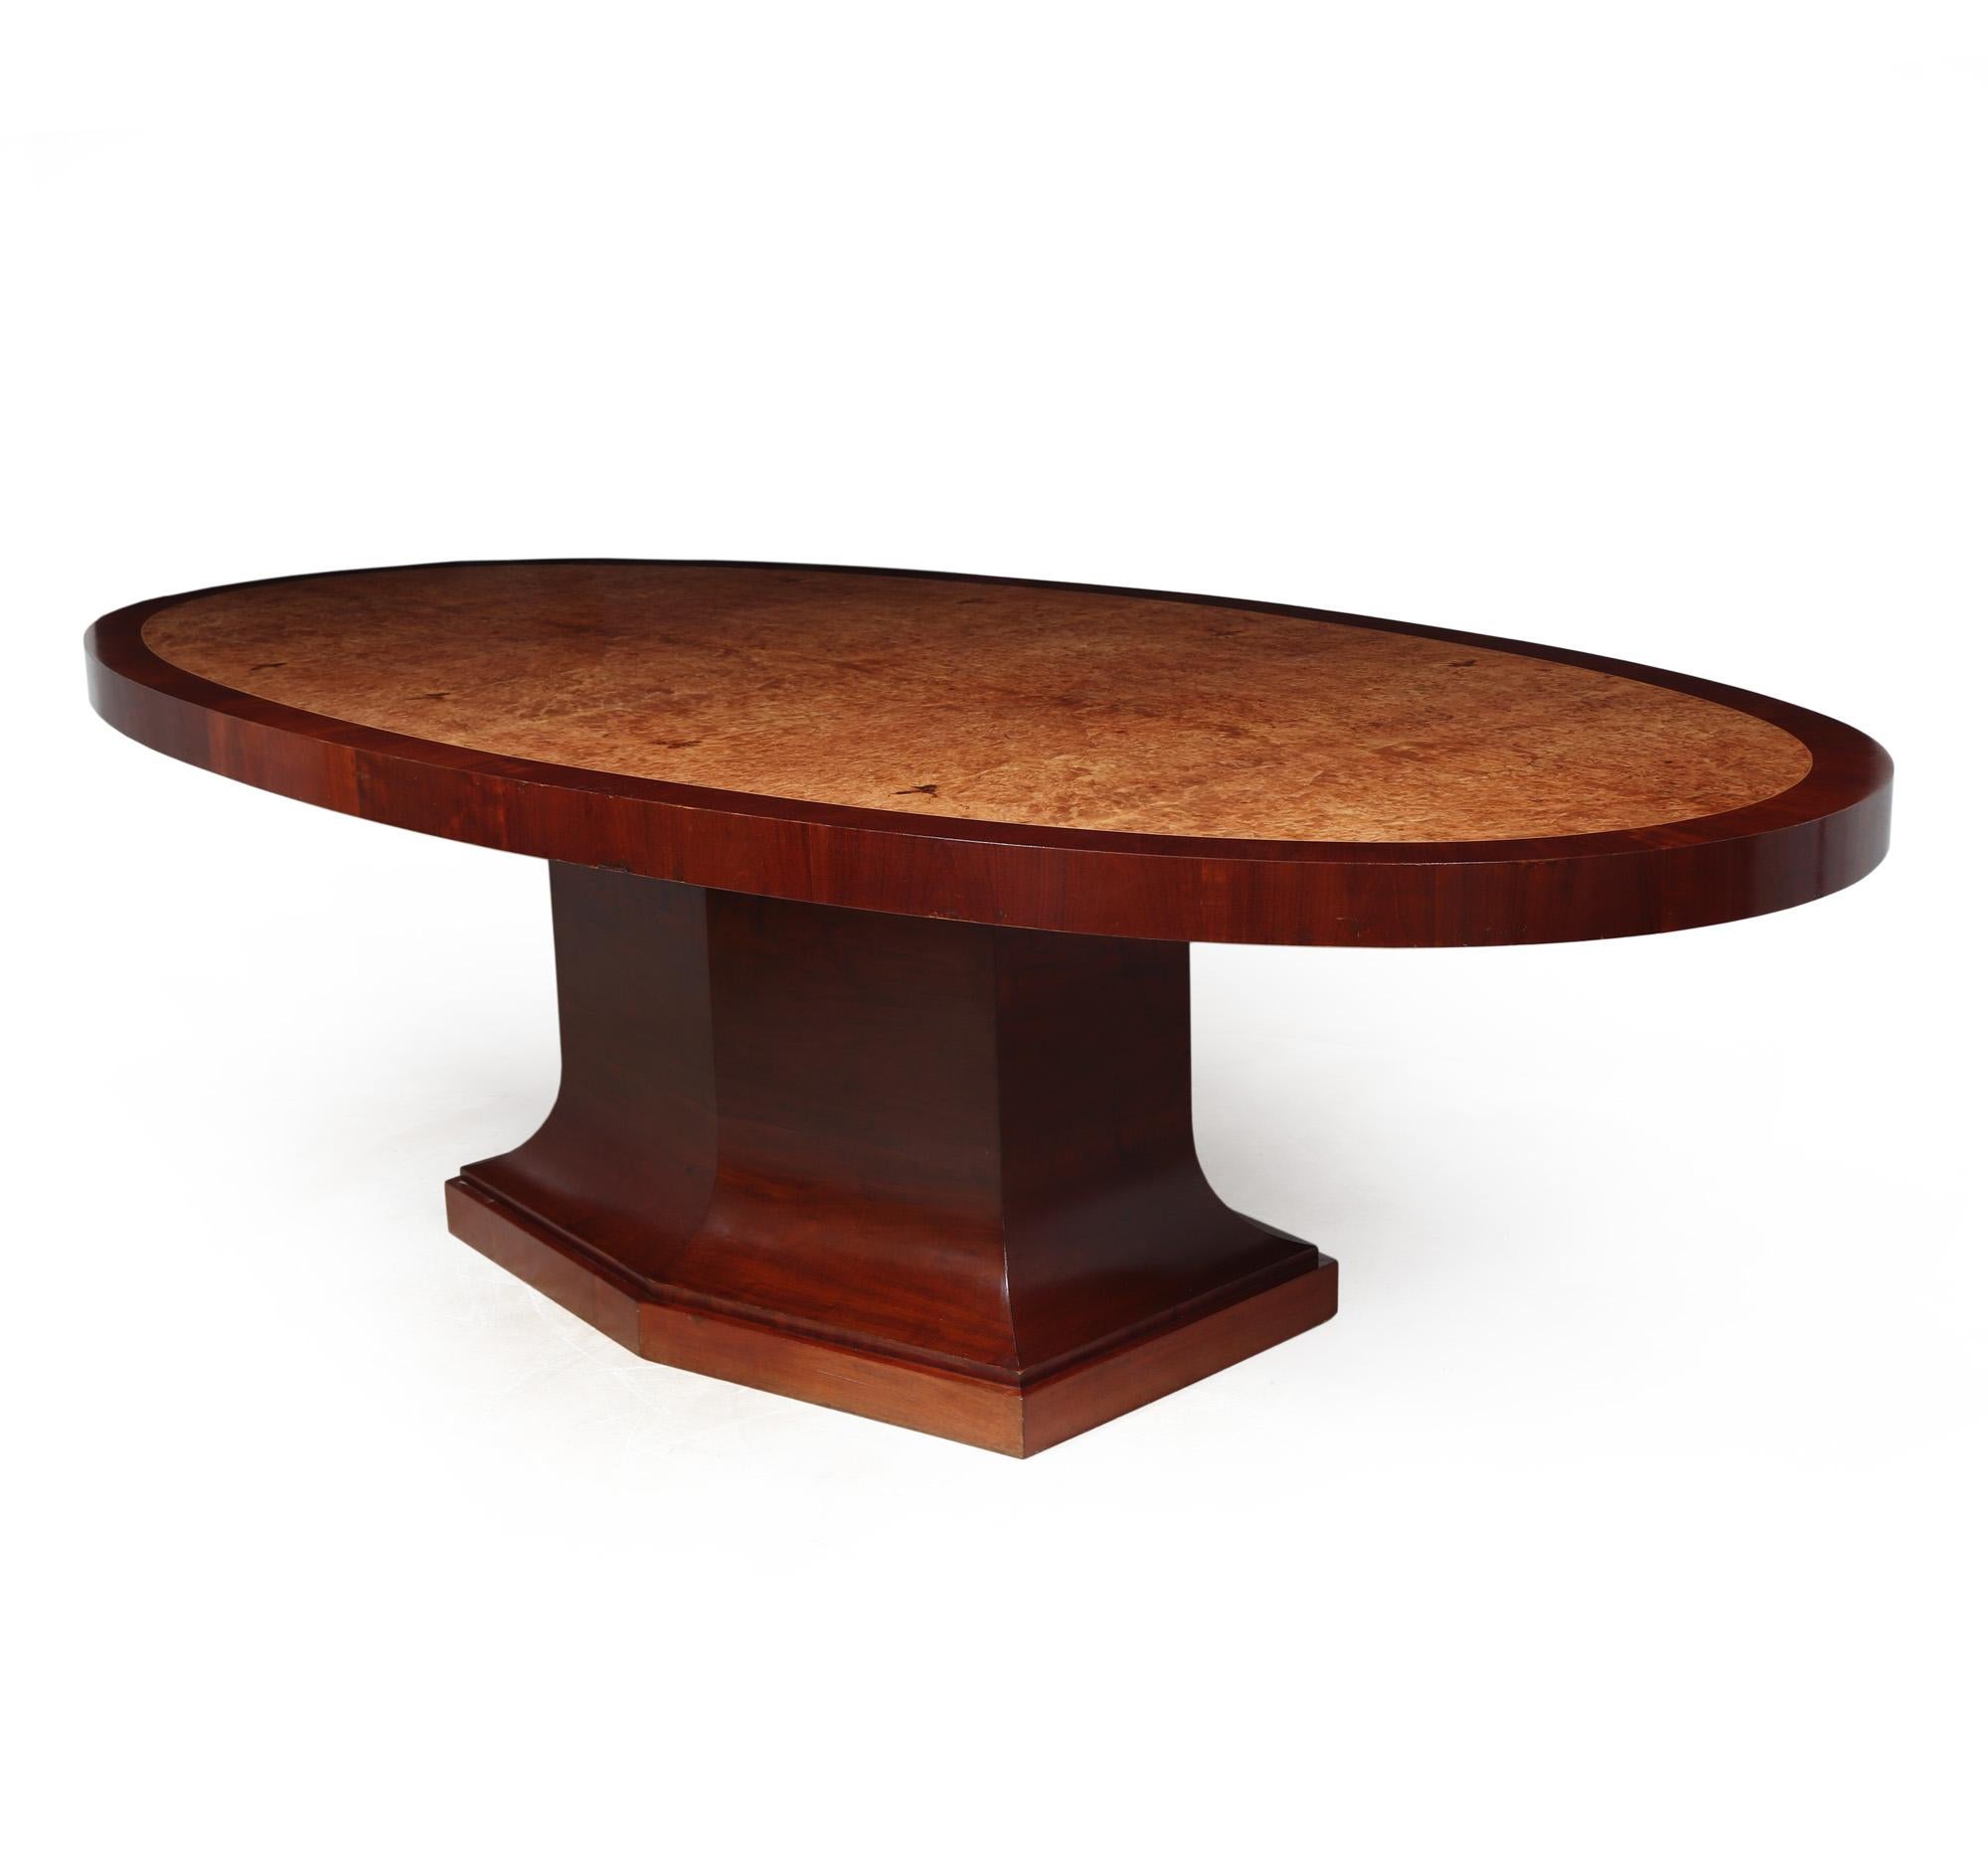 FRENCH ART DECO TABLE
A large 8 seat dining table produced in France in the Art Deco period, having lovely tight burr maple with contrasting mahogany cross banding and standing on a substantial central 6 sided pedestal base, the table has been